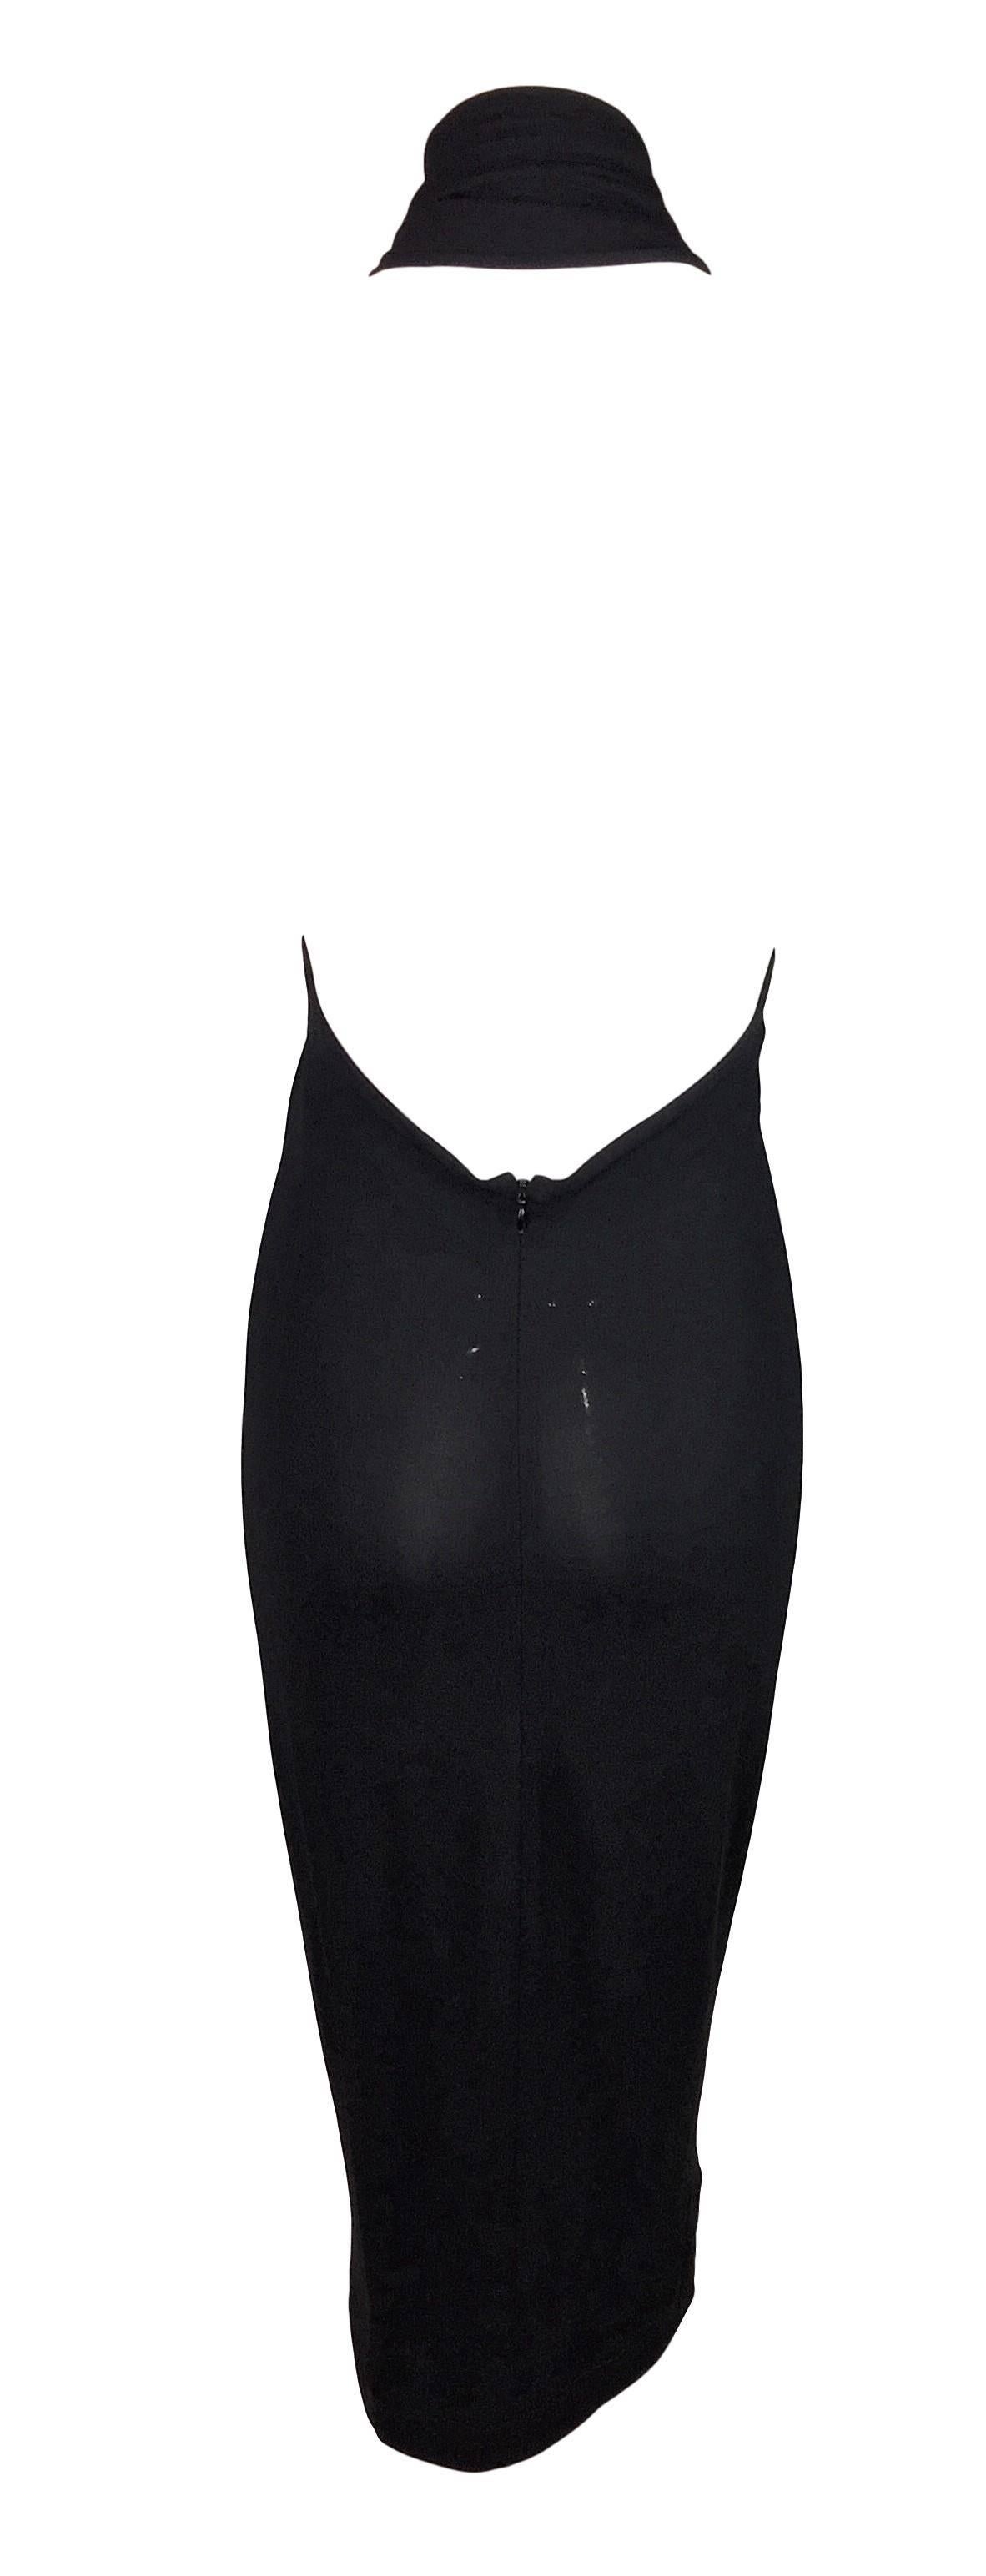 S/S 1996 Dolce & Gabbana Sheer Black Plunging Halter Pin-Up Backless Dress In Excellent Condition In Yukon, OK